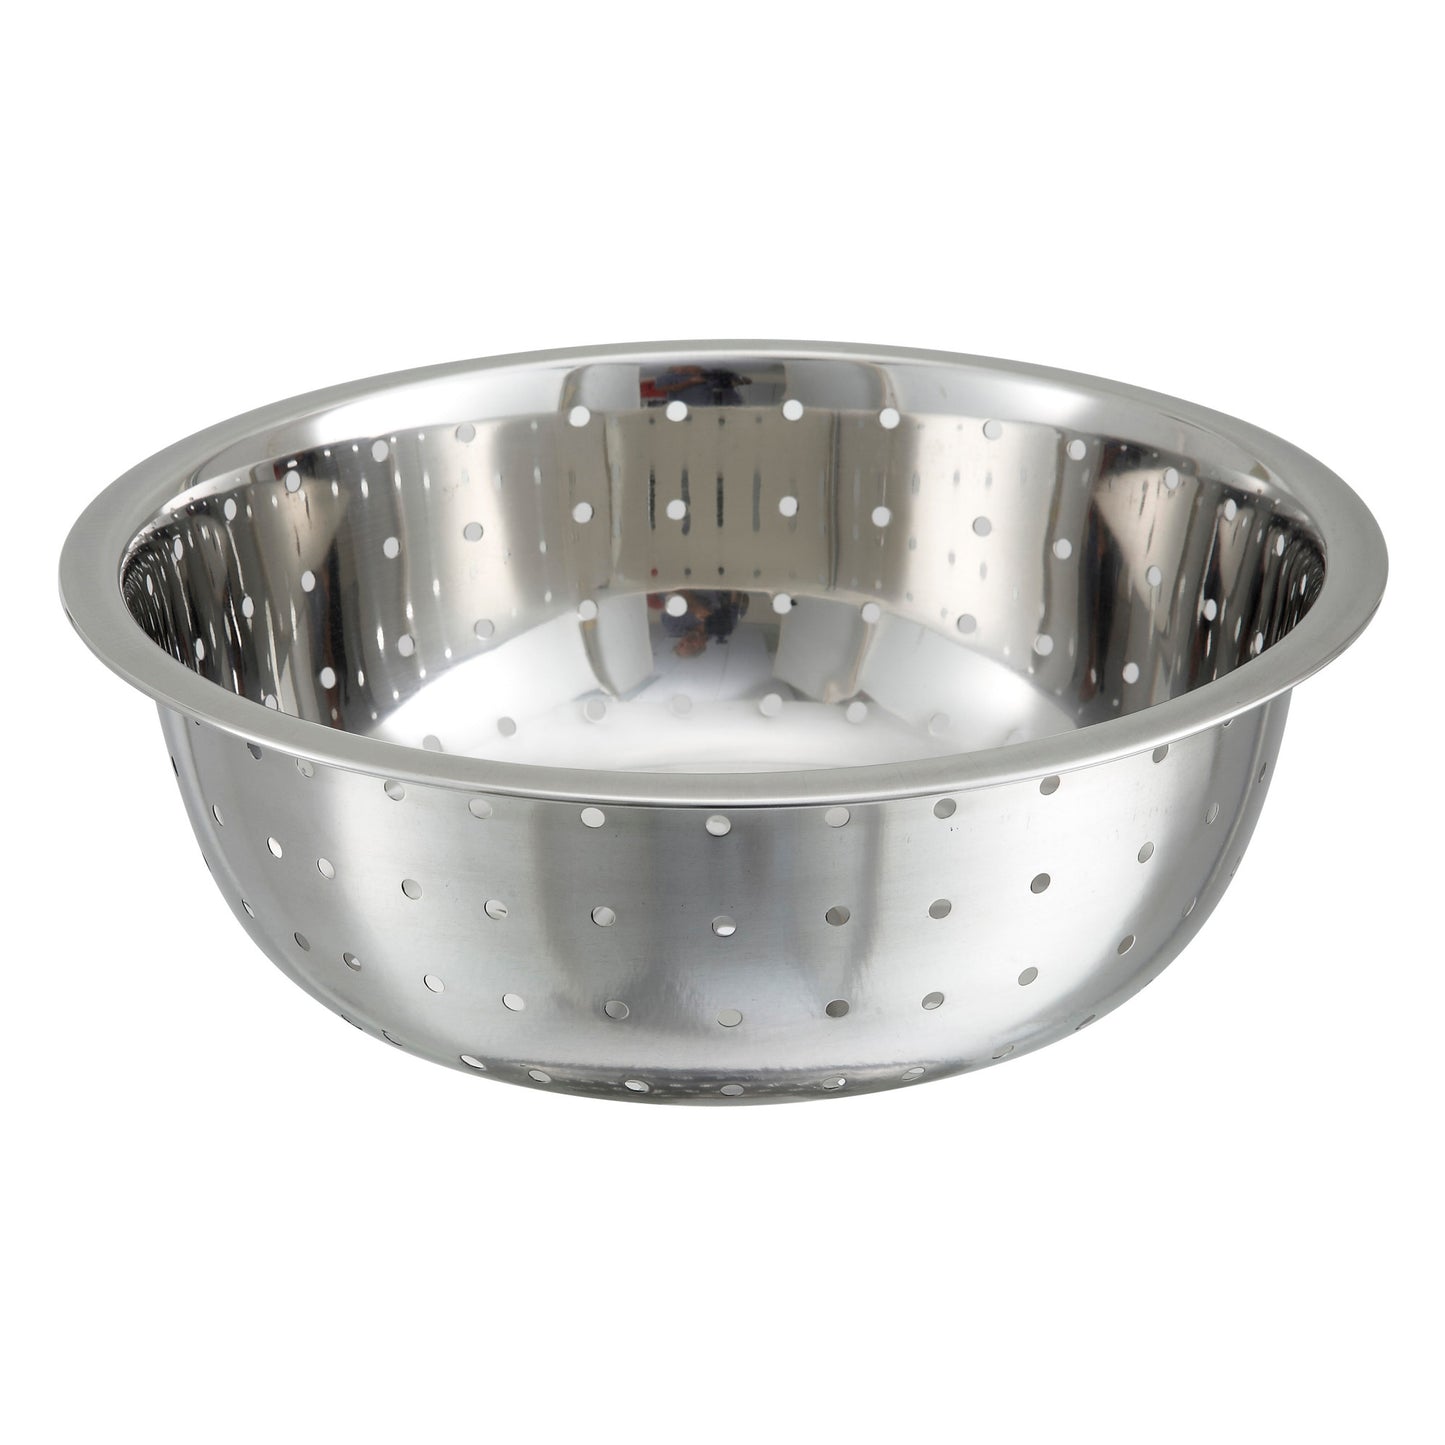 CCOD-11L - 11" Diameter Stainless Steel Chinese-Style Colander with 5 mm Drain Holes